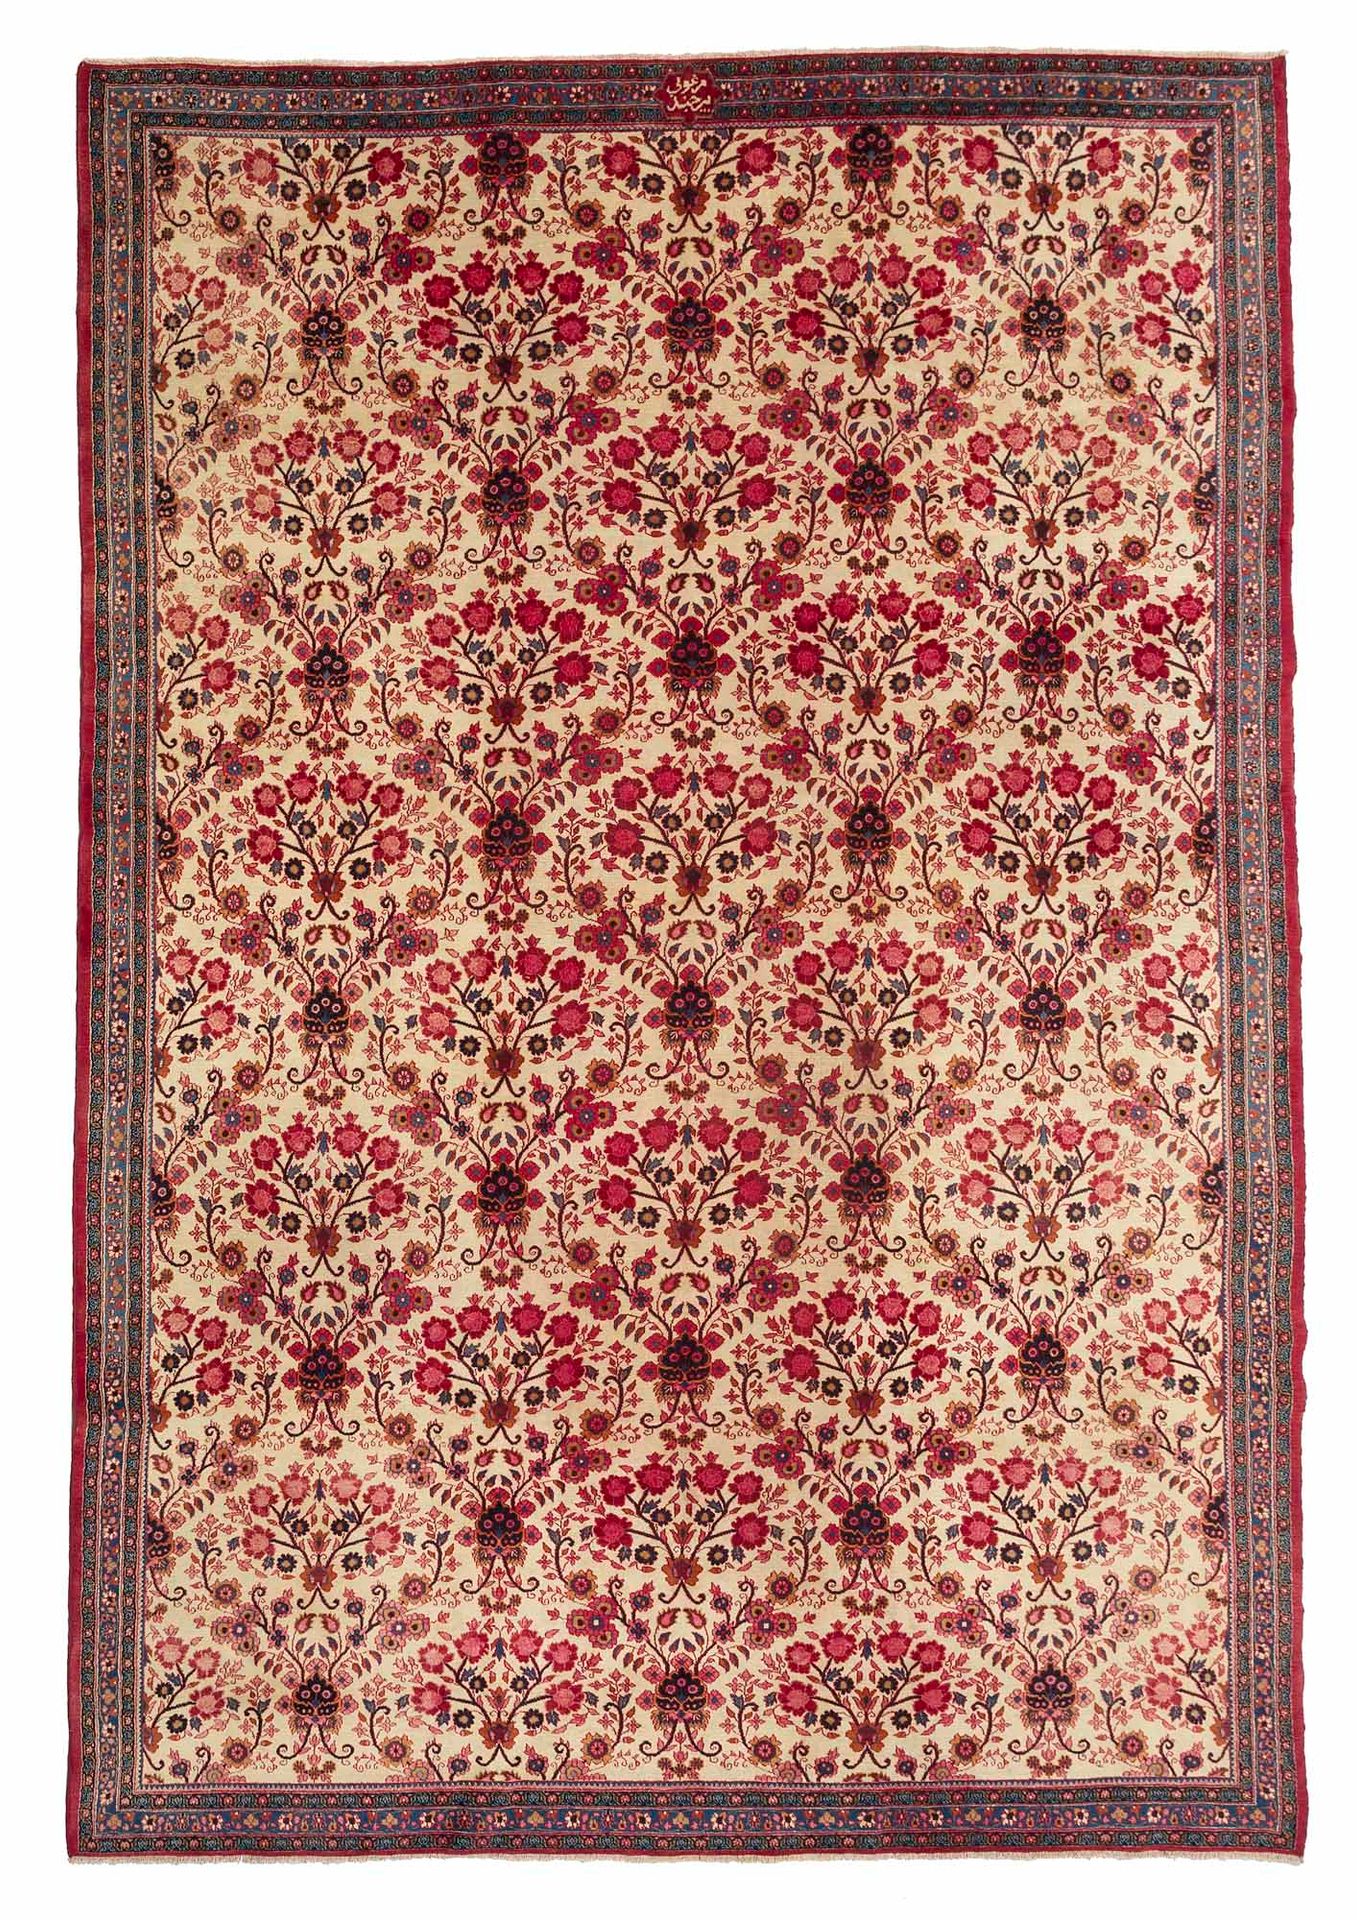 Null Tapis MÉCHED KHORASSAN, (Perse), 1er tiers du 20e siècle

Dimensions : 376 &hellip;